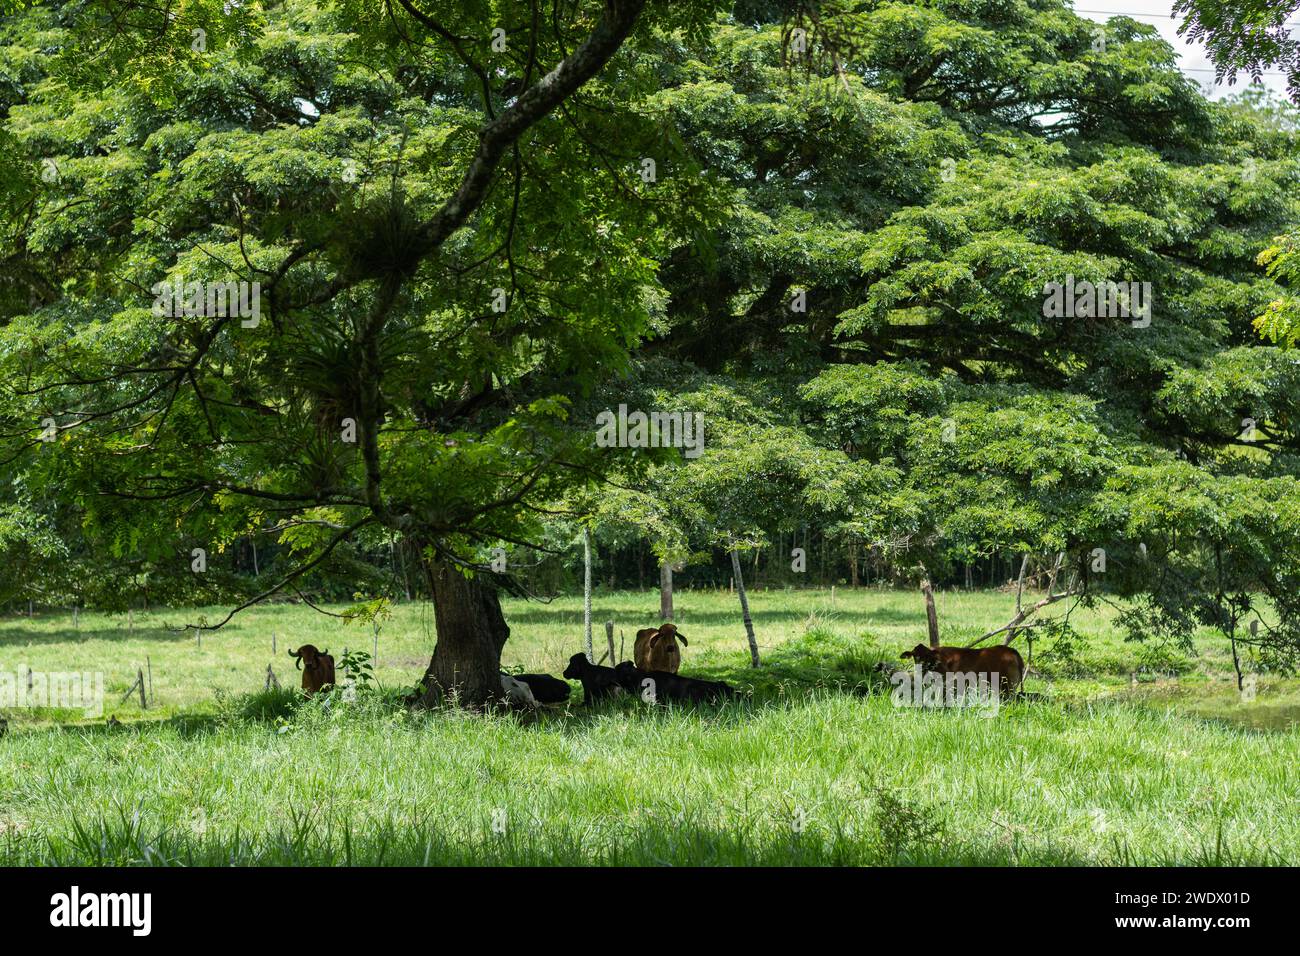 herd of gyr cows taking shade under a large tree in a grass field on a cattle farm Stock Photo